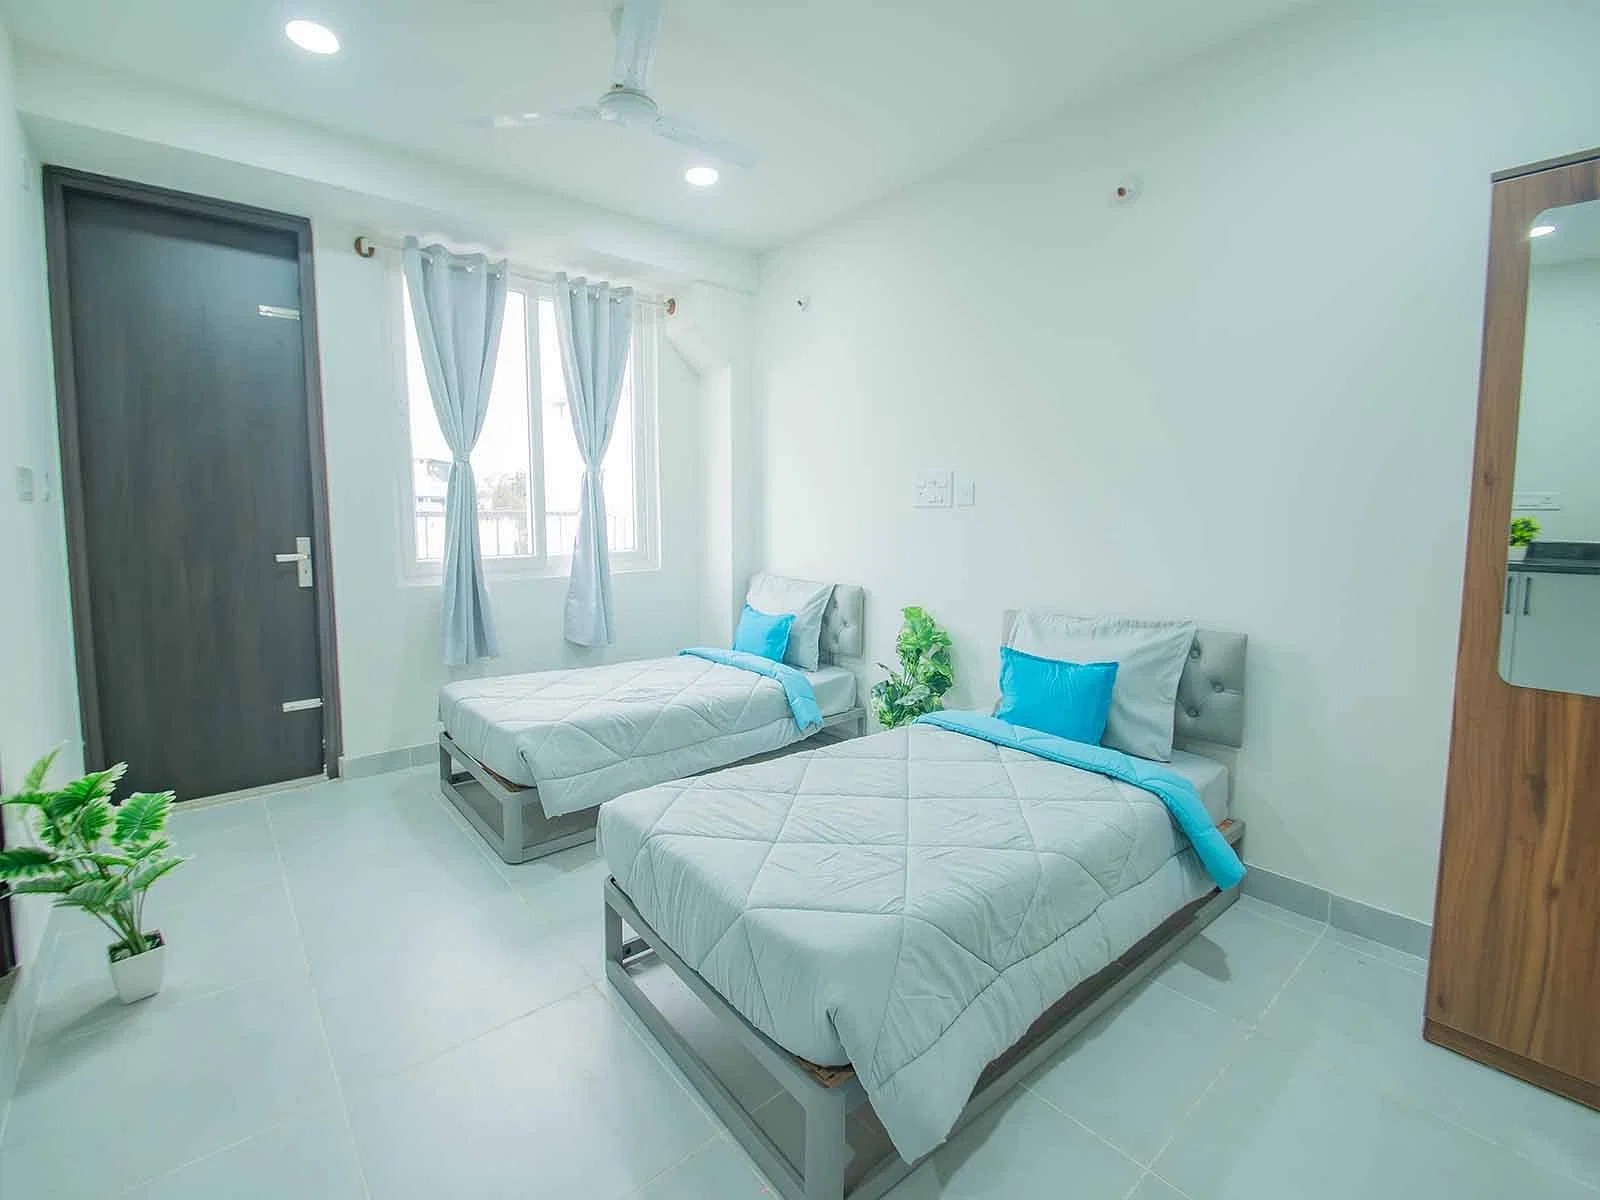 pgs in Kalyan nagar with Daily housekeeping facilities and free Wi-Fi-Zolo Westfield